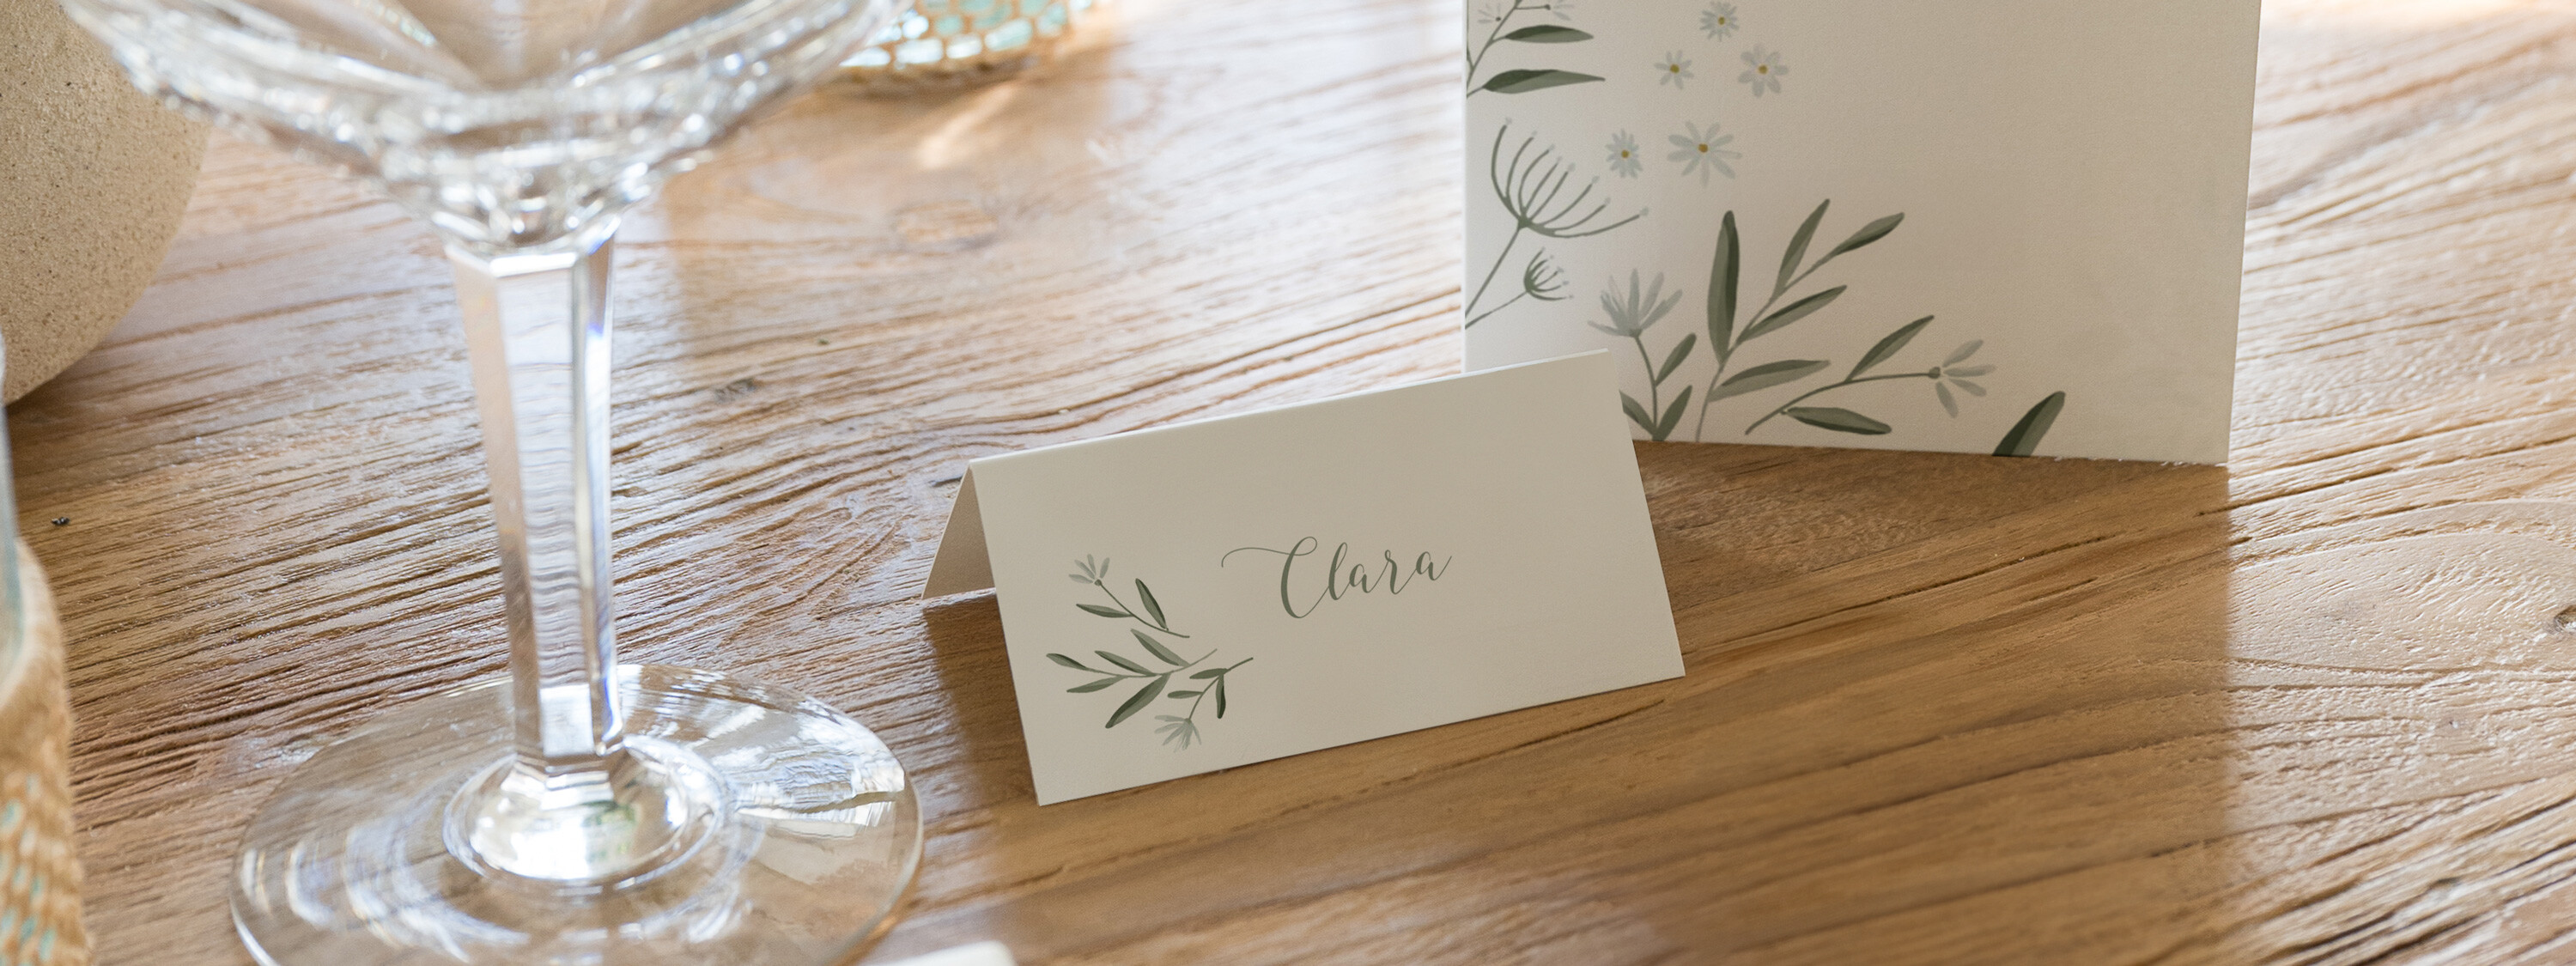 Wedding Place Cards from Marguerite Courtieu